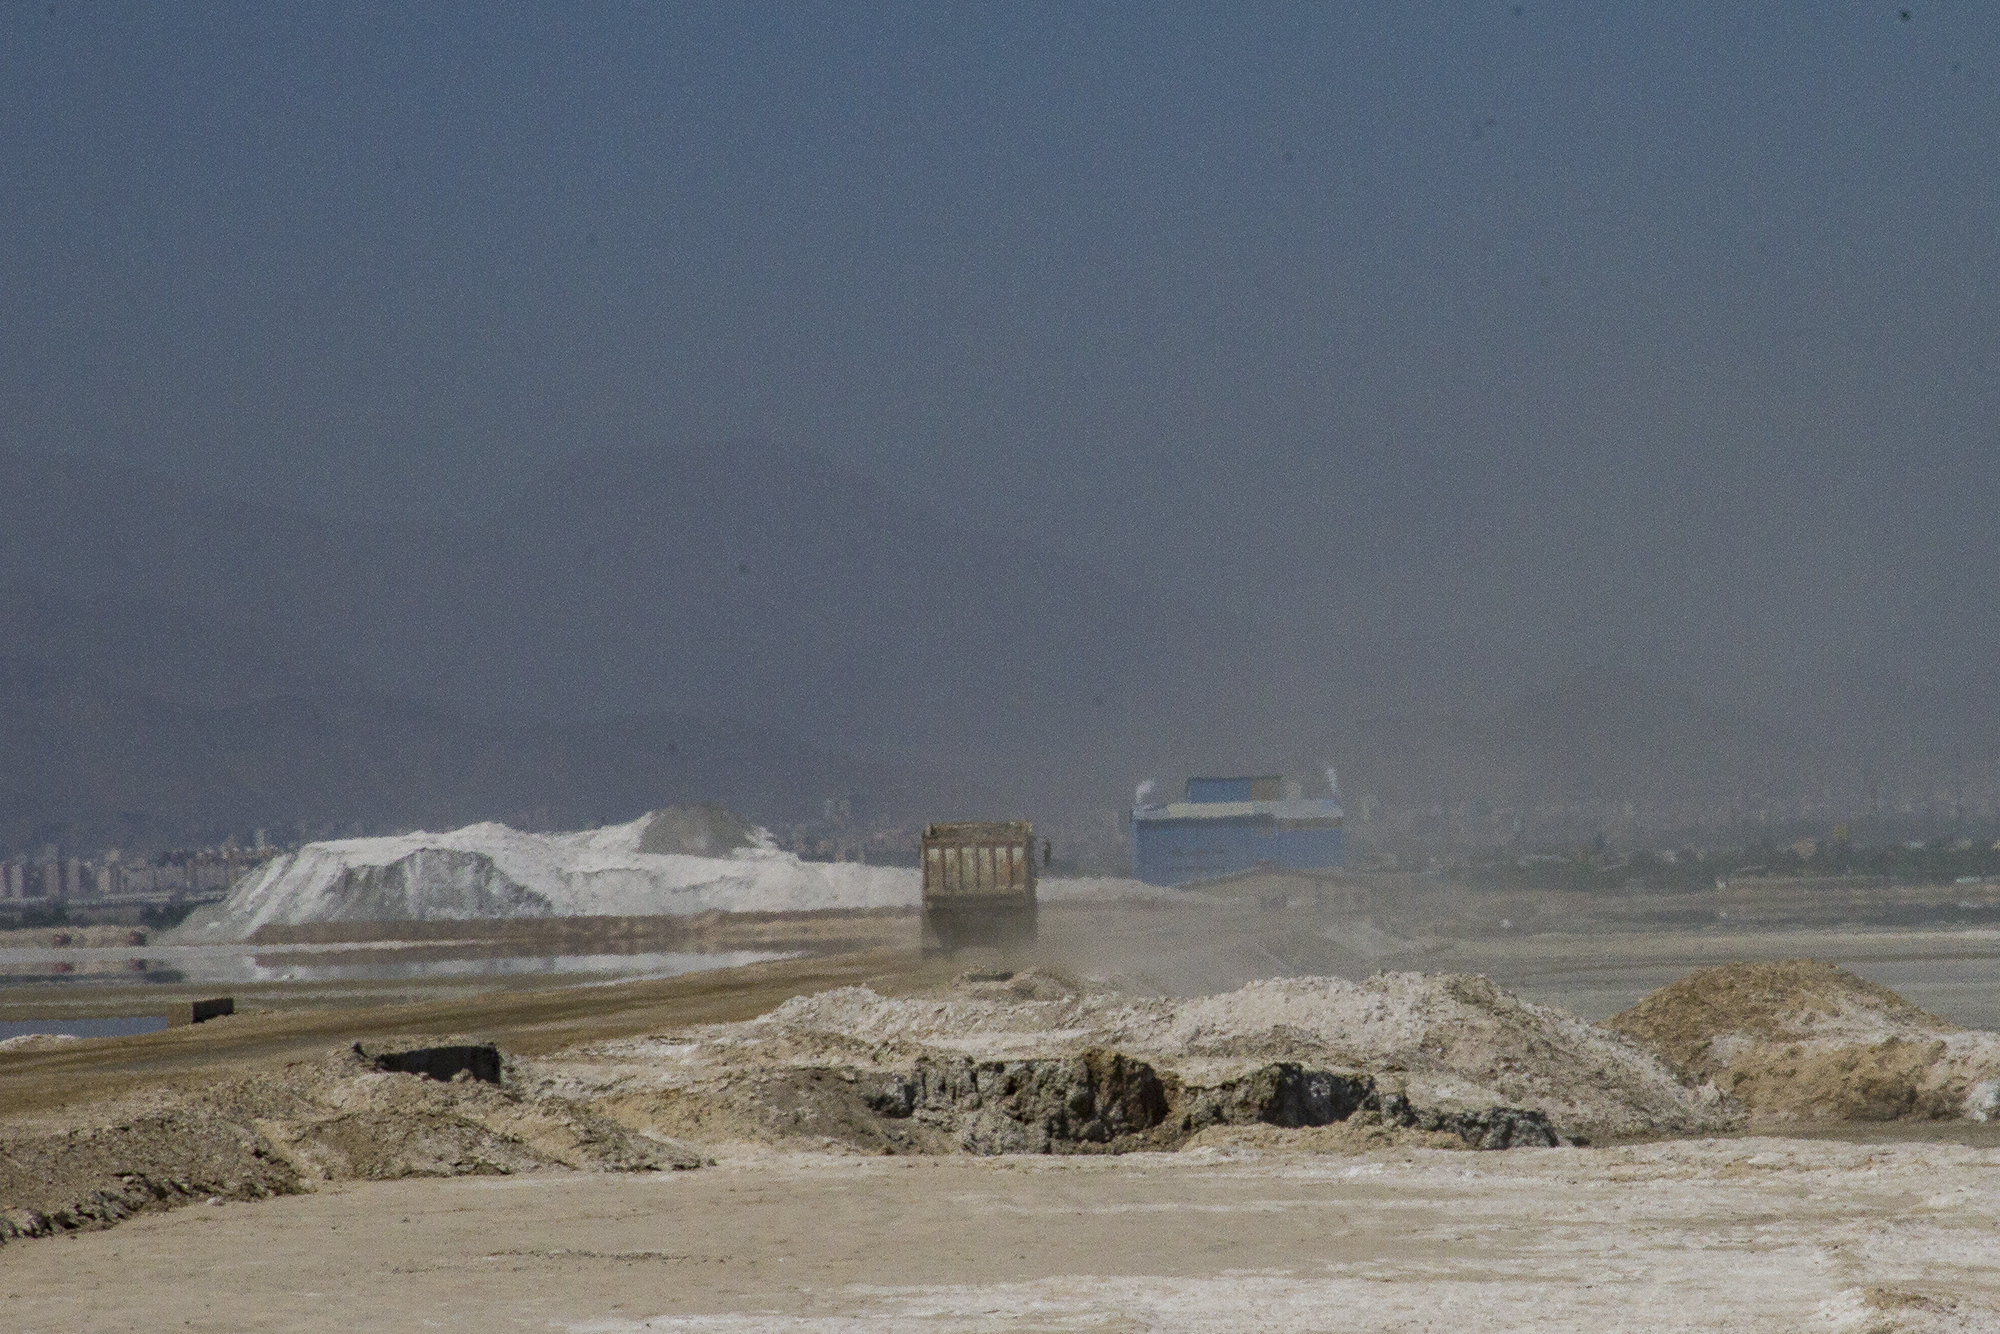 Mining activities; white mound of salts visible in the background (photo: Qantara)